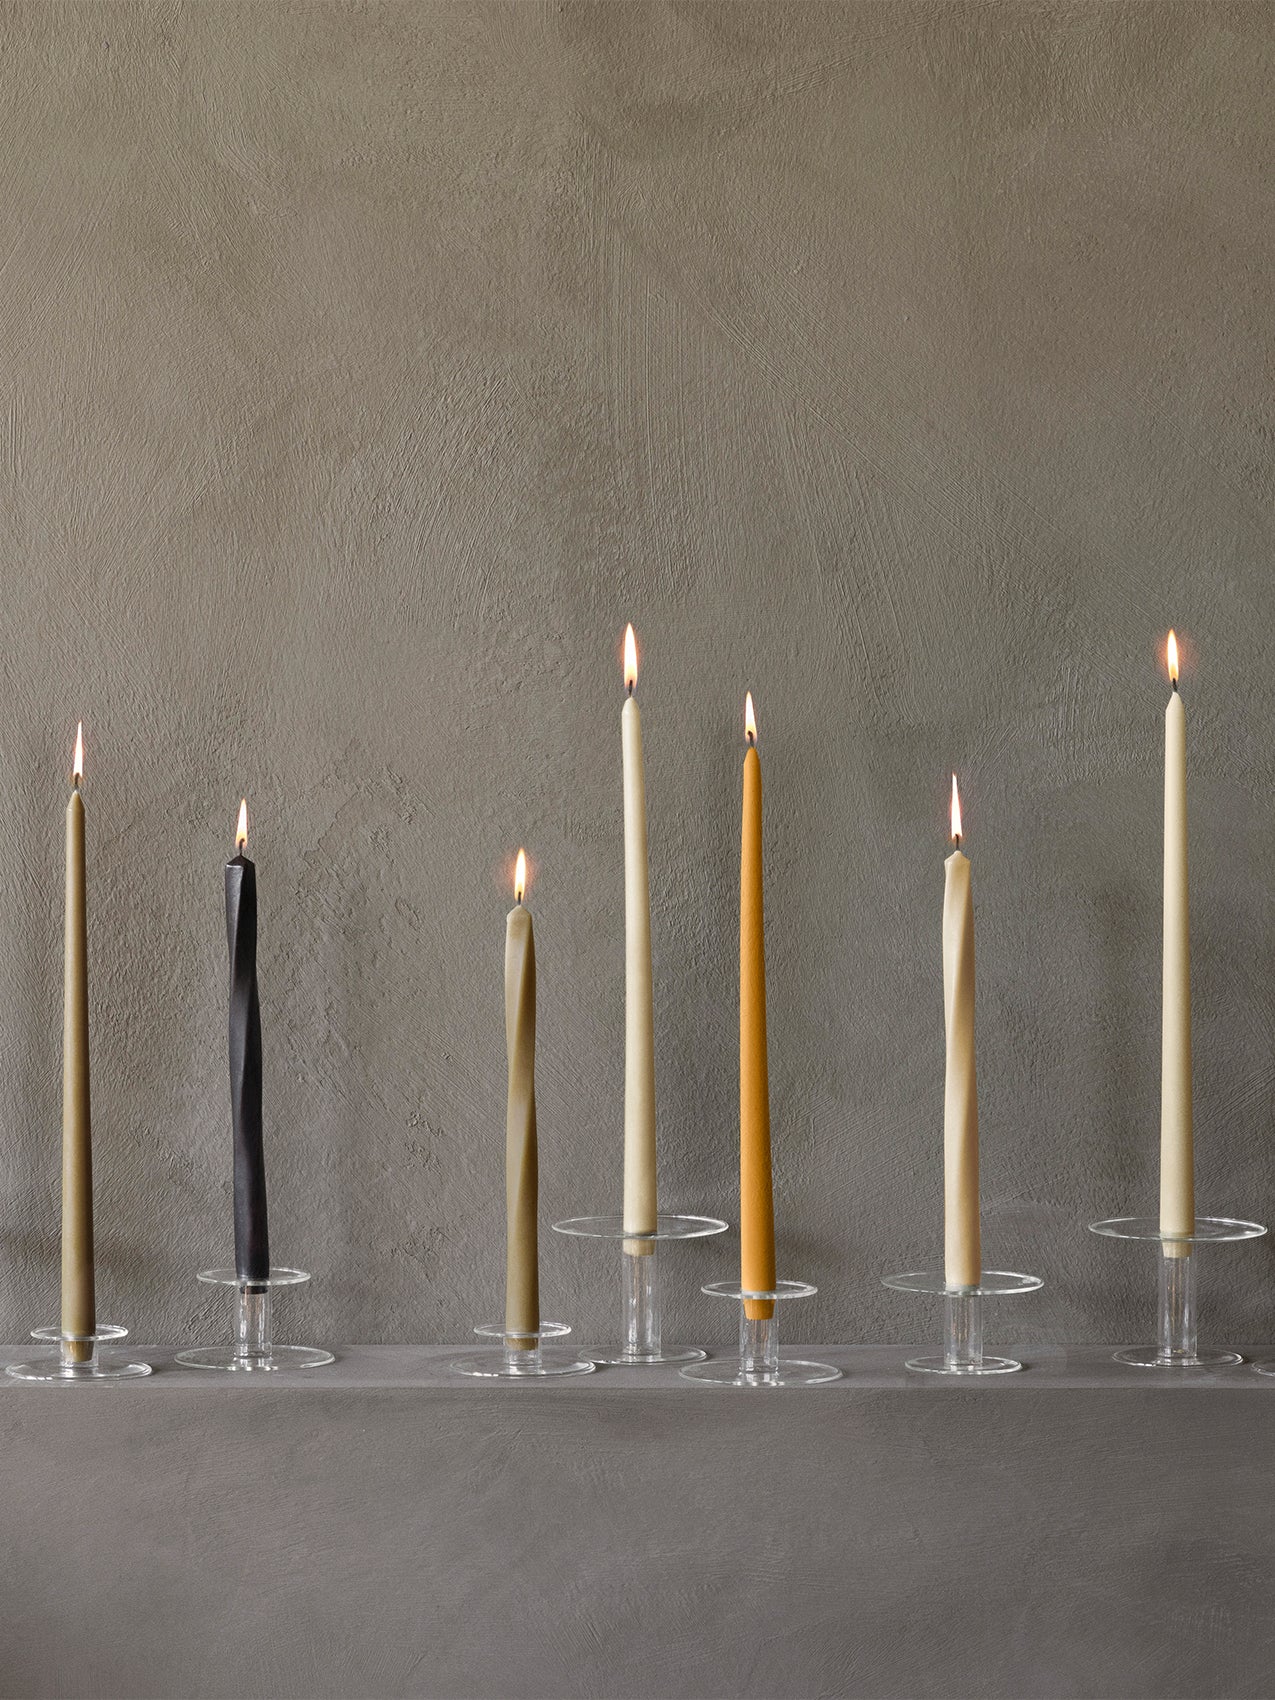 Twist Tapered Candles, Set of 4